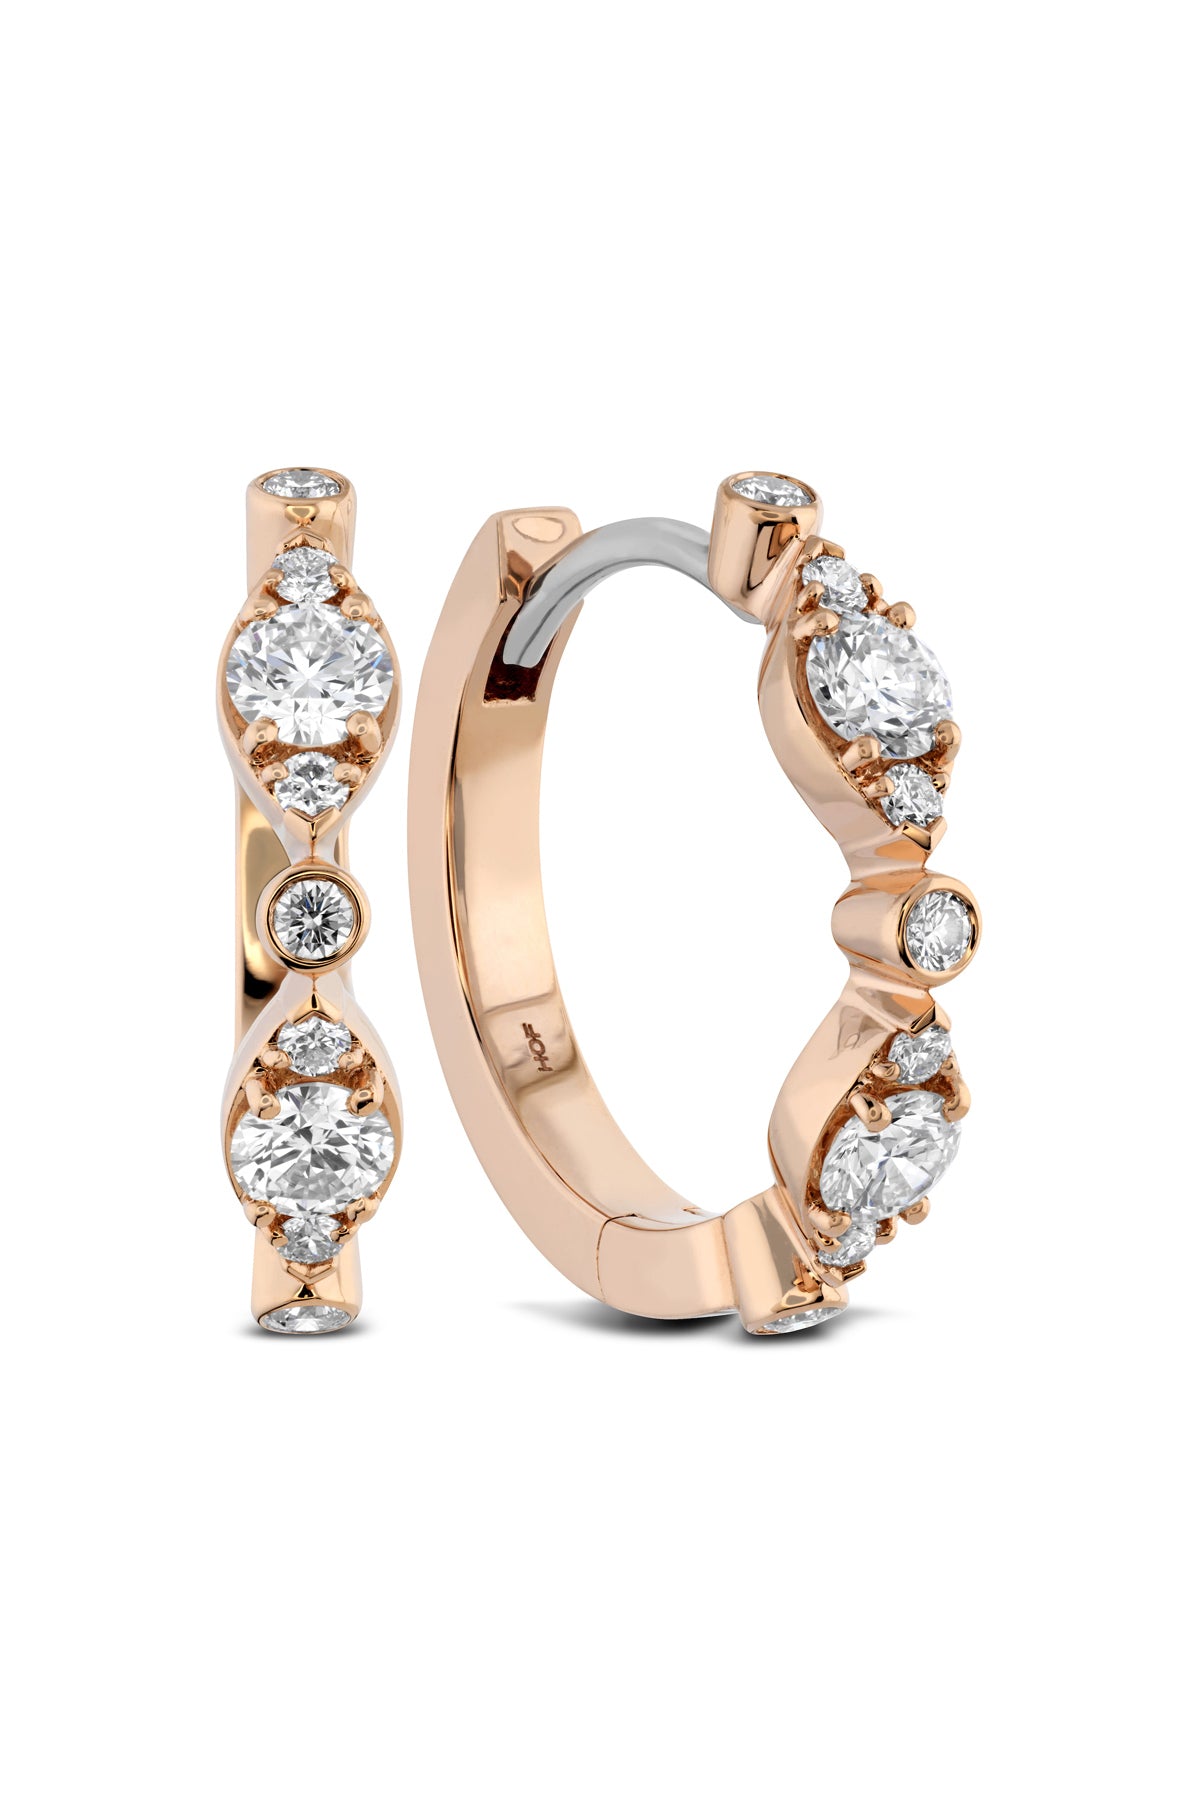 Bezel Regal Huggies From Hearts On Fire available at LeGassick Diamonds and Jewellery Gold Coast, Australia.